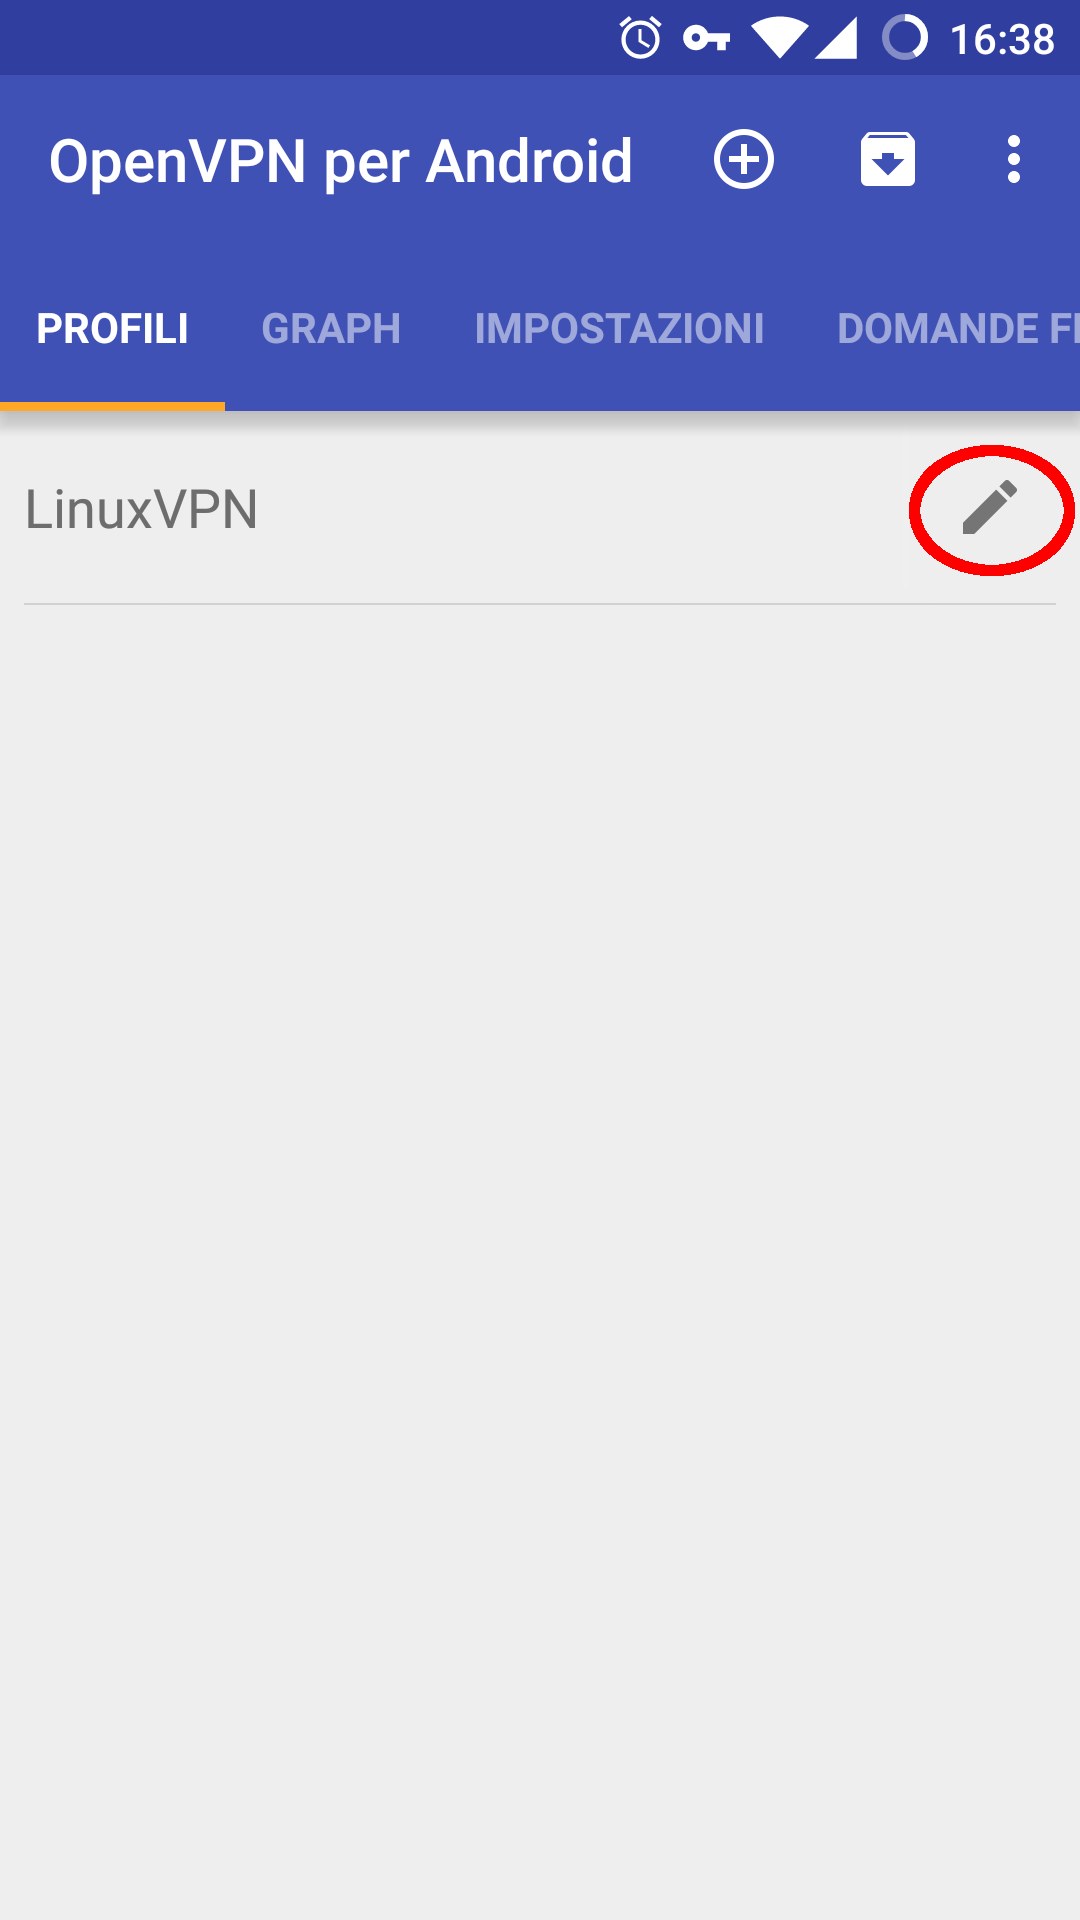 openvpn_android_3.png